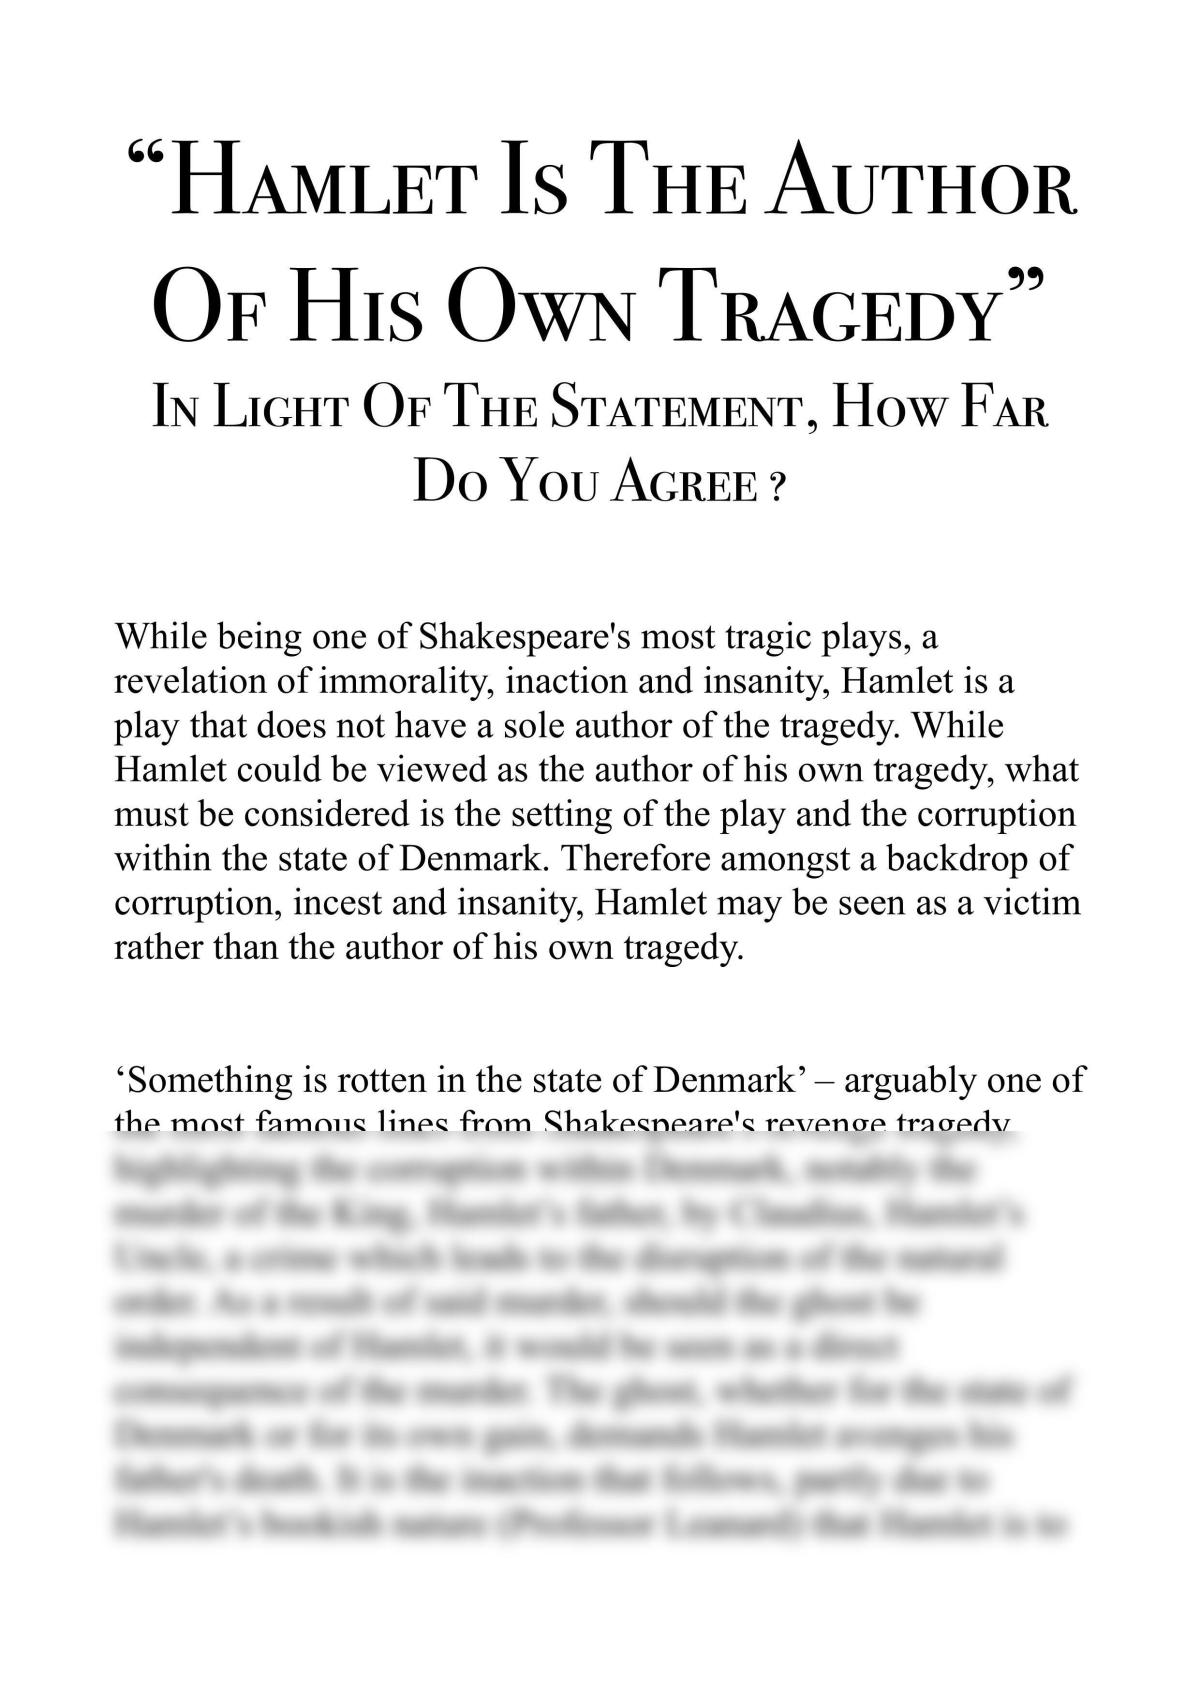 “Hamlet is the Author of His Own Tragedy” - Page 1